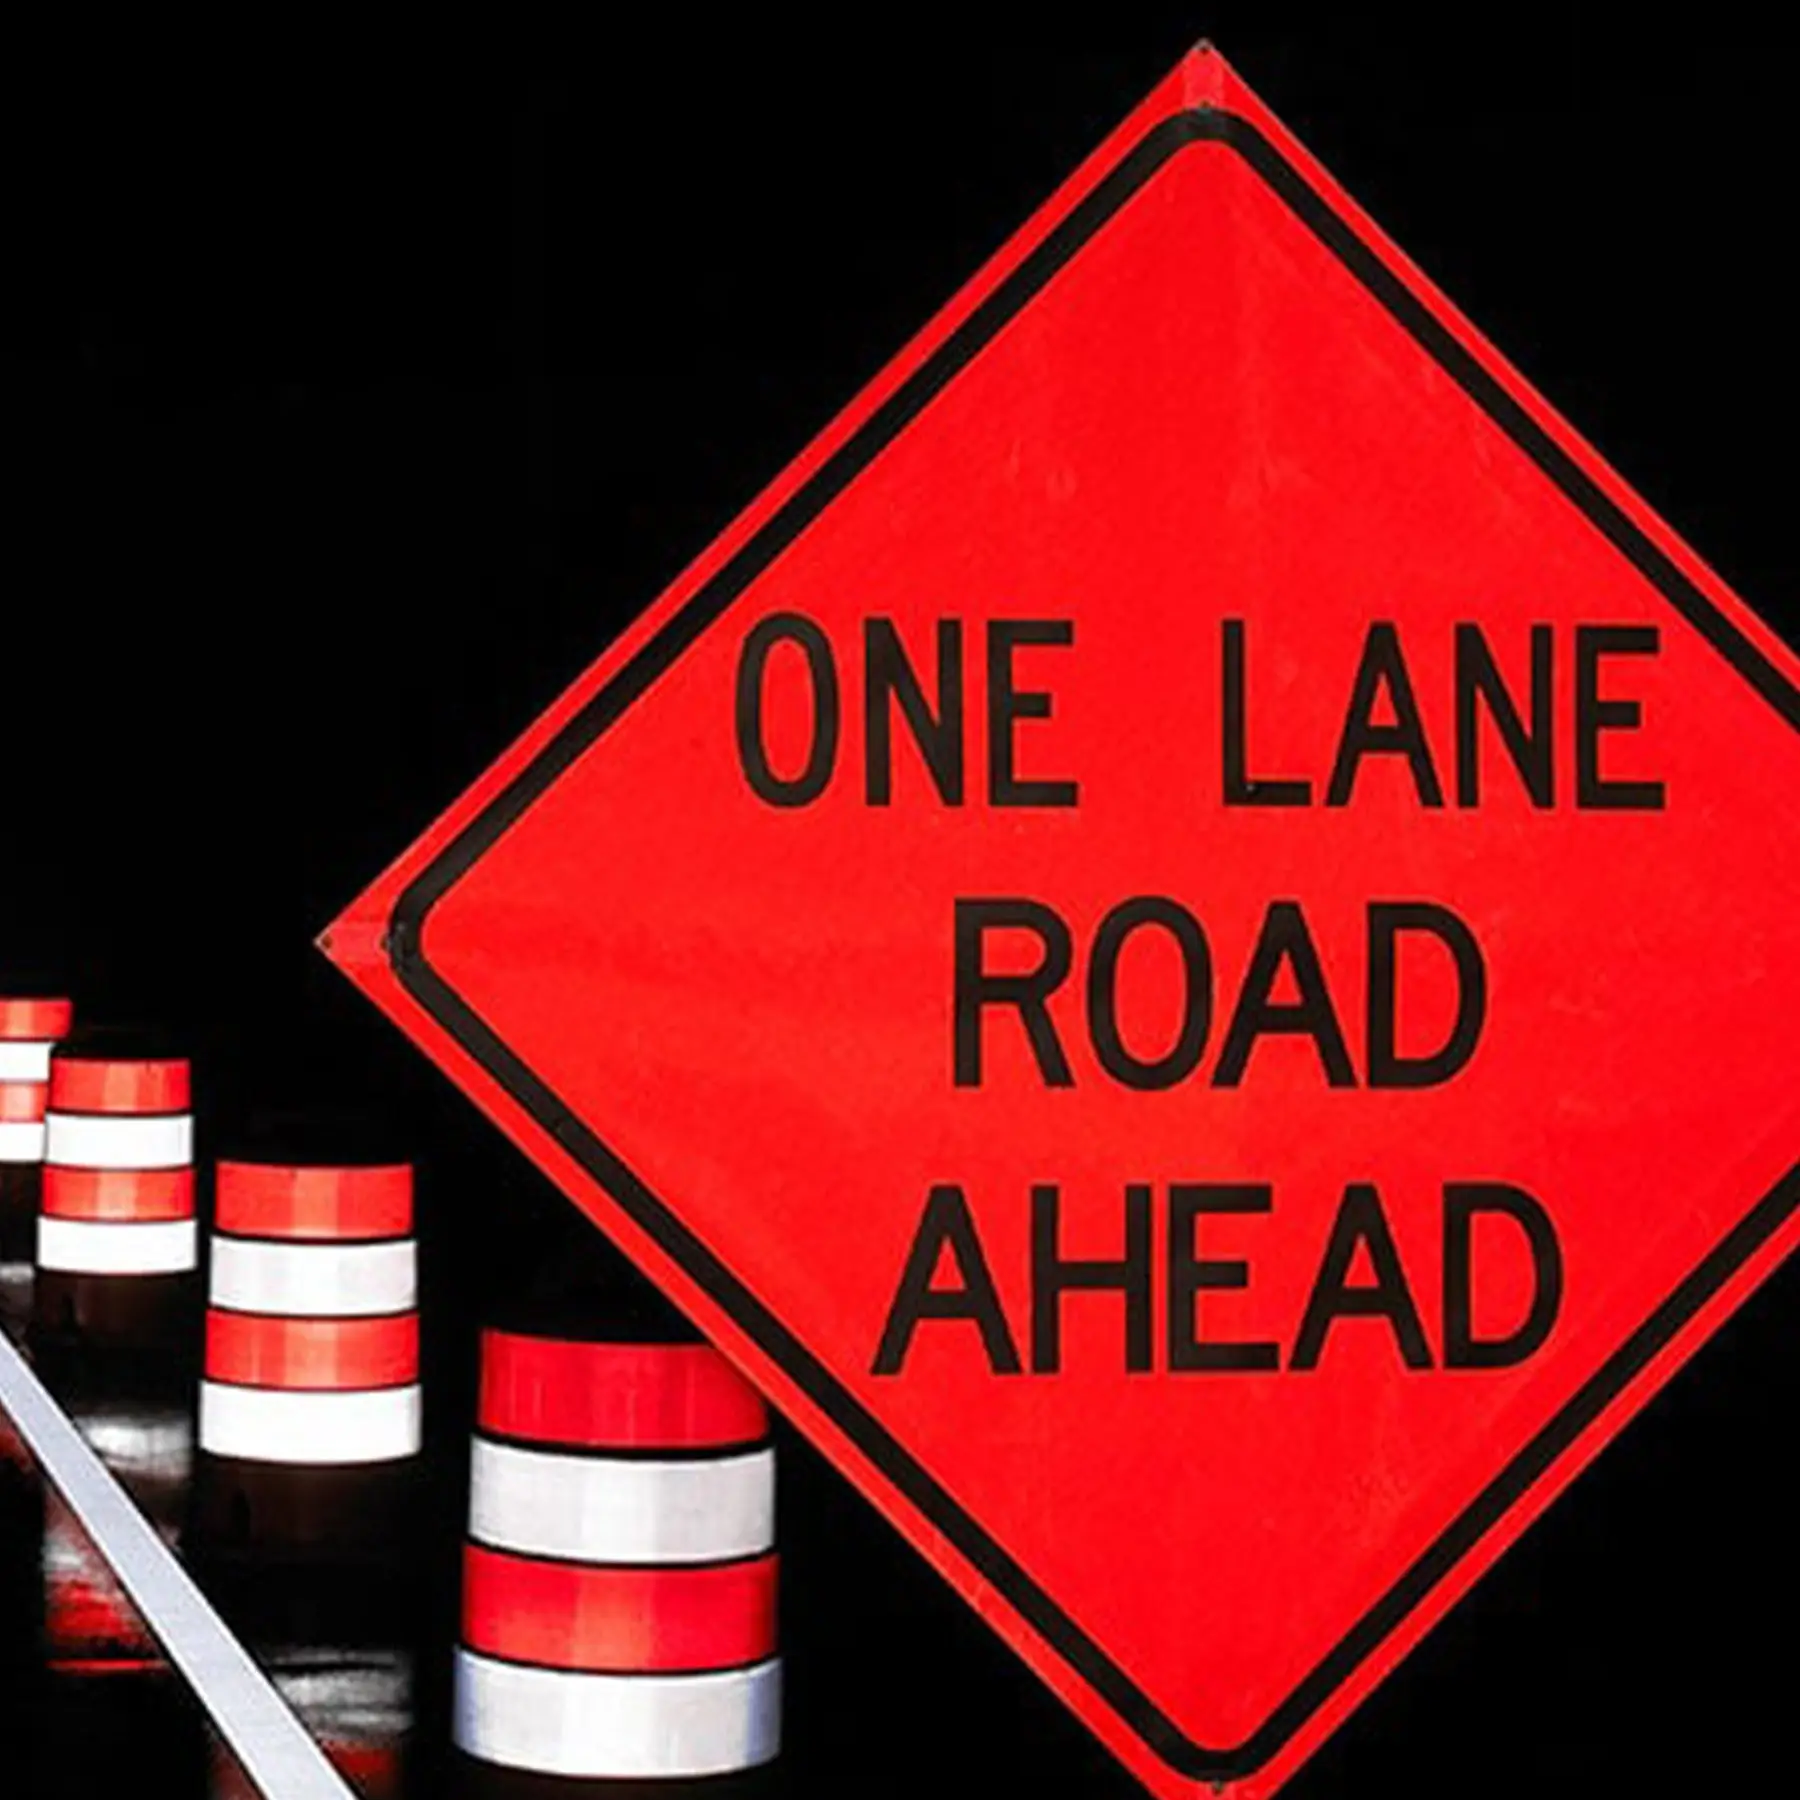 Road Sign saying "One Lane Road Ahead".